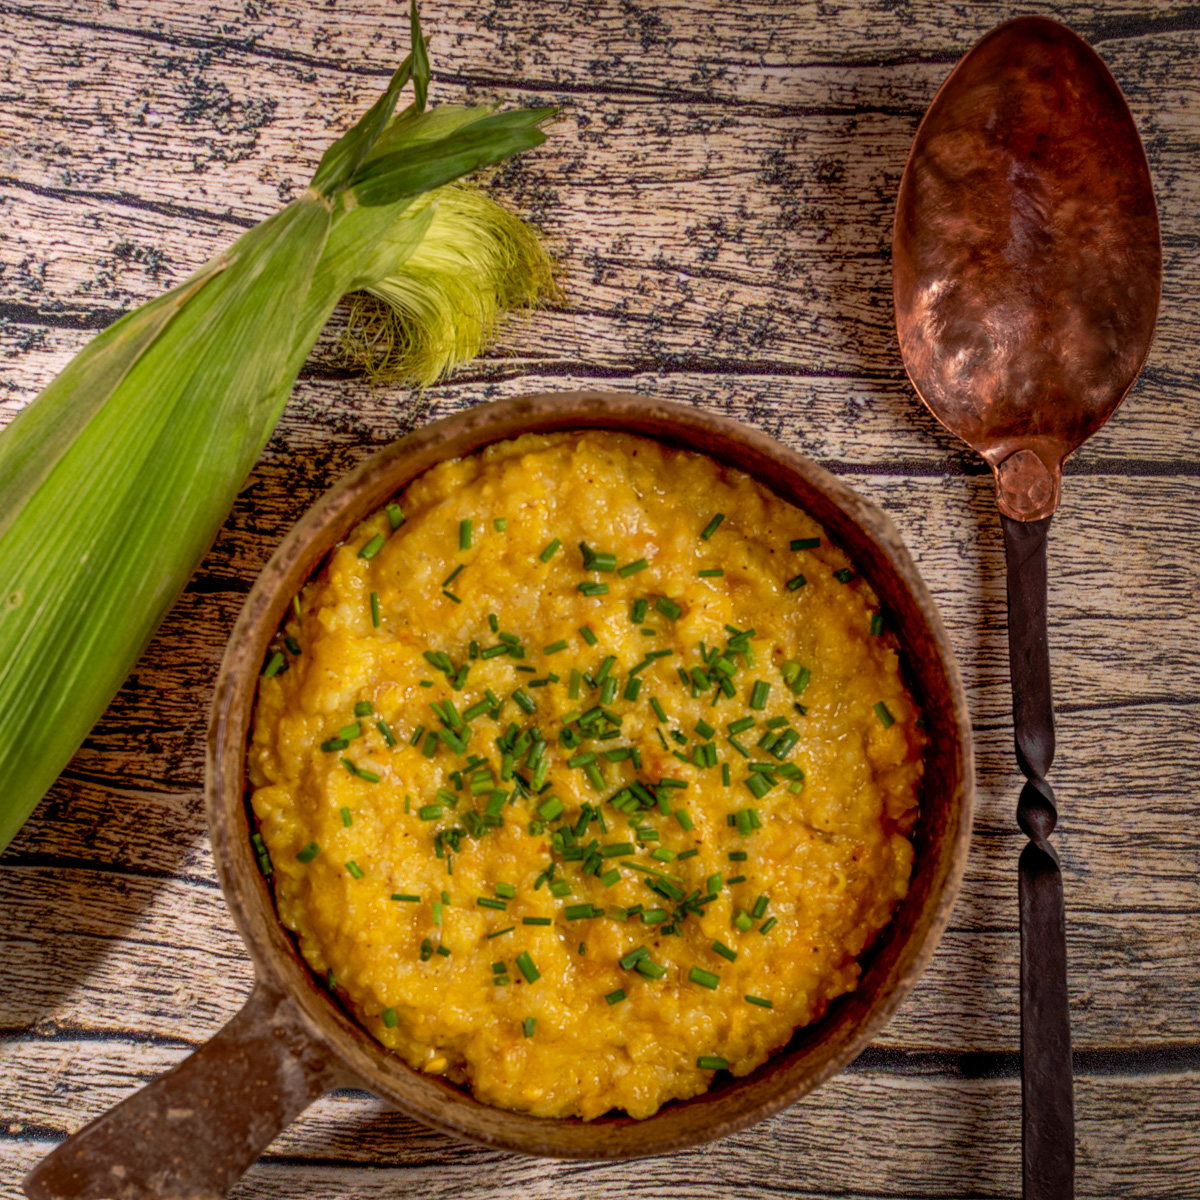 Creamed corn without cream.